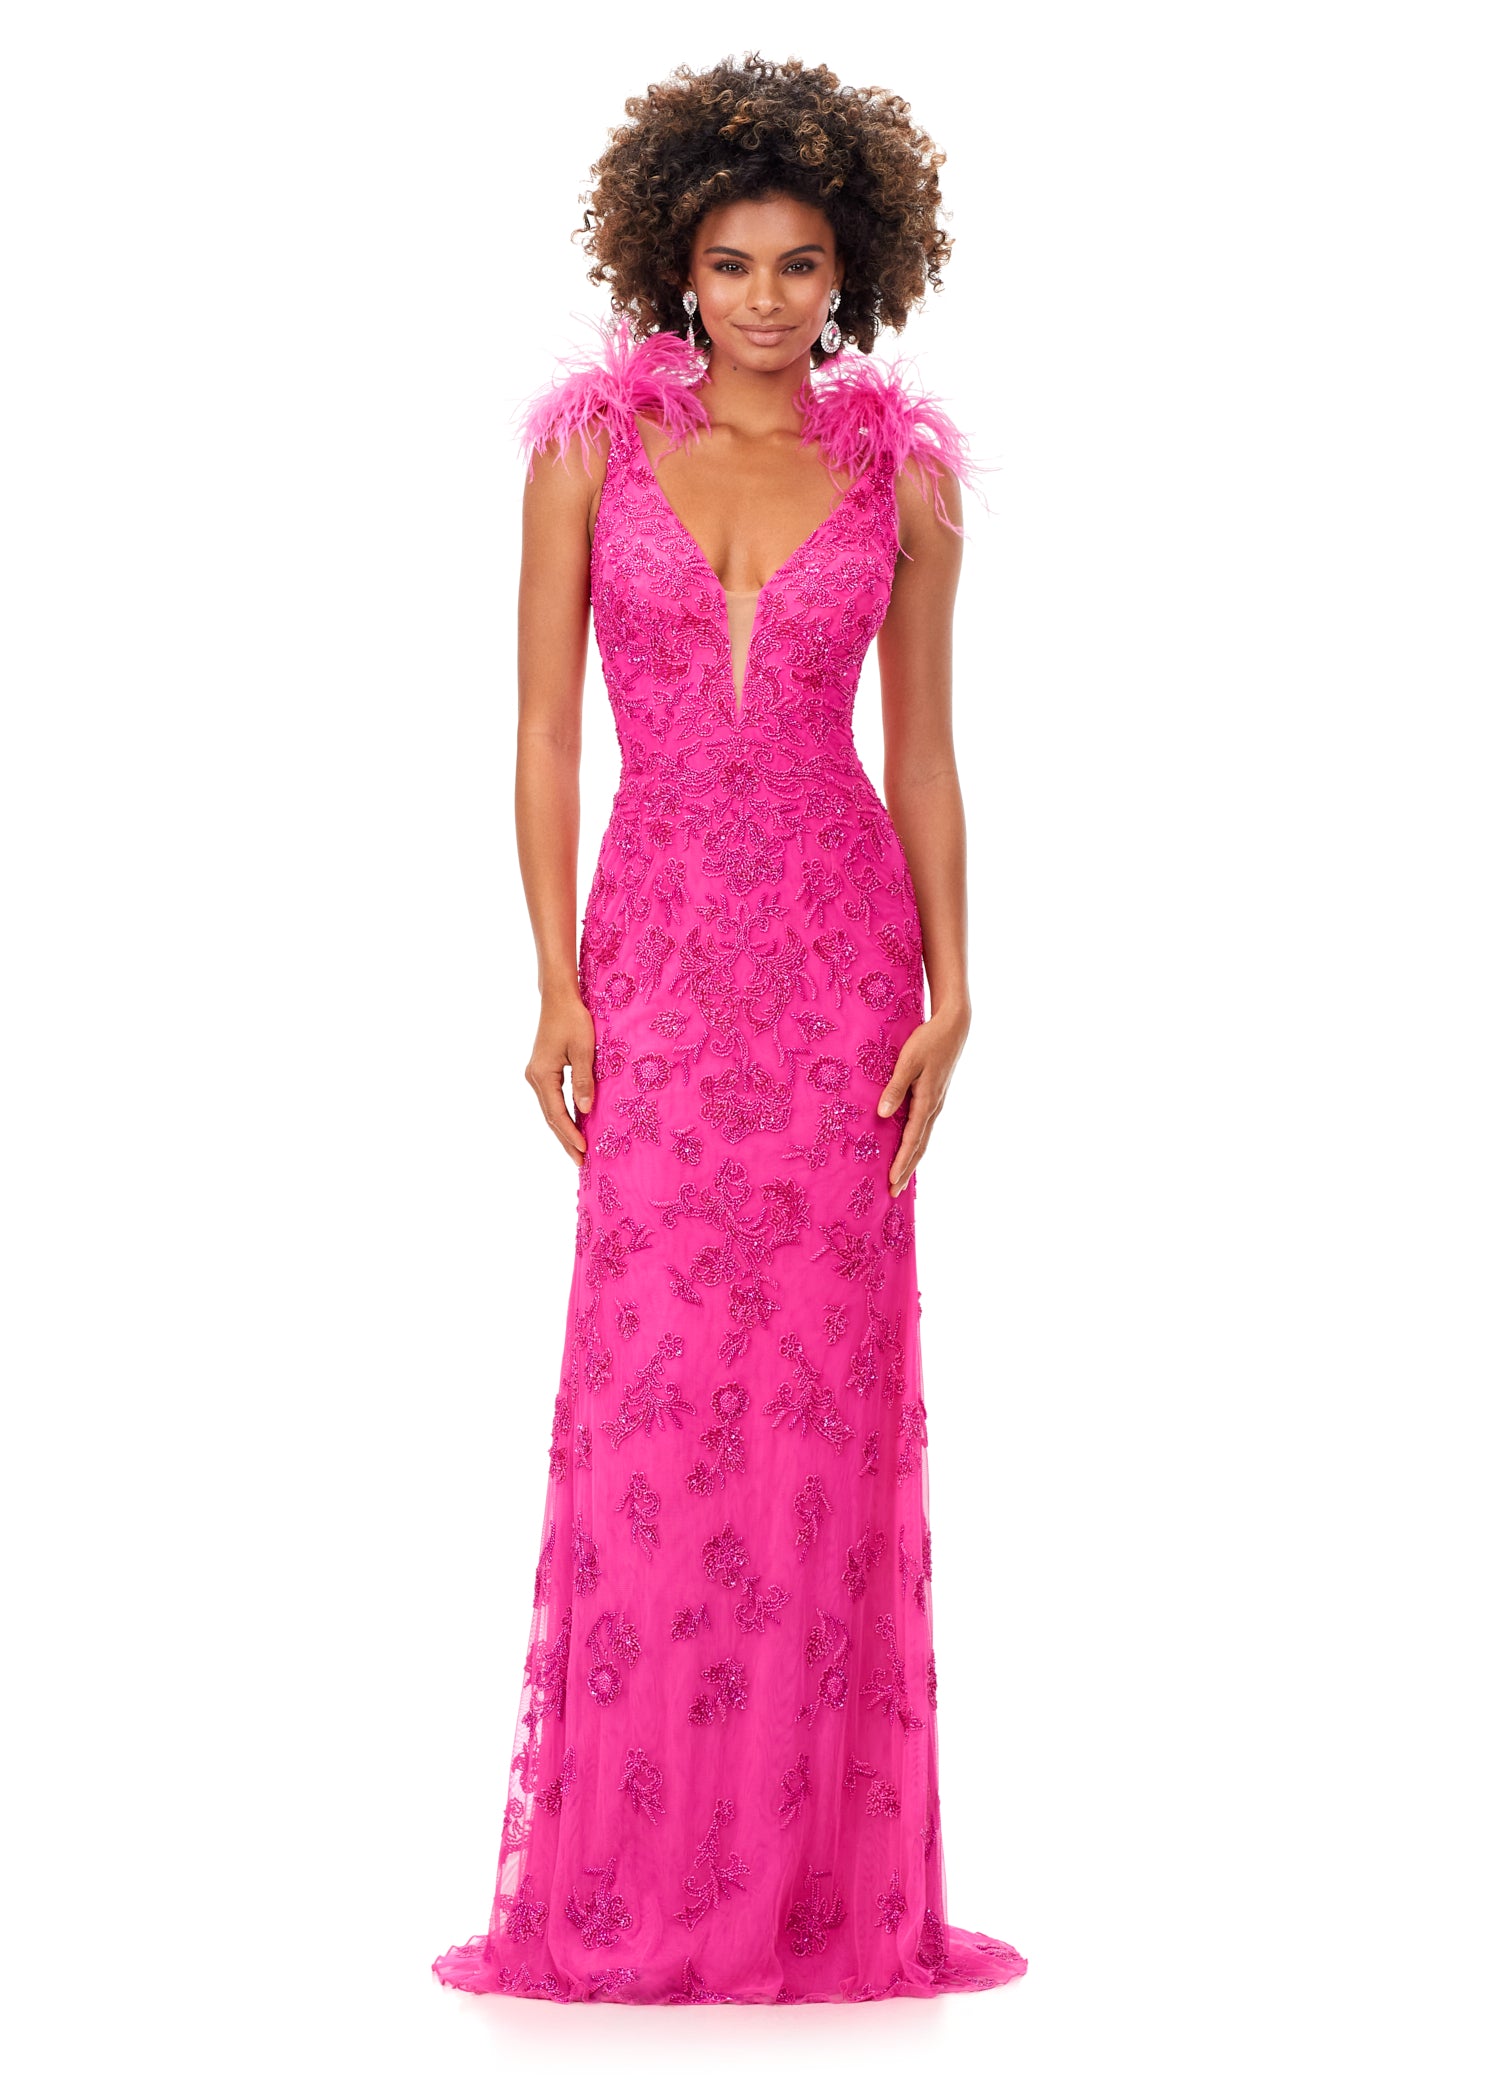 HOT PINK SEQUIN DRESS WITH FEATHER SLEEVES